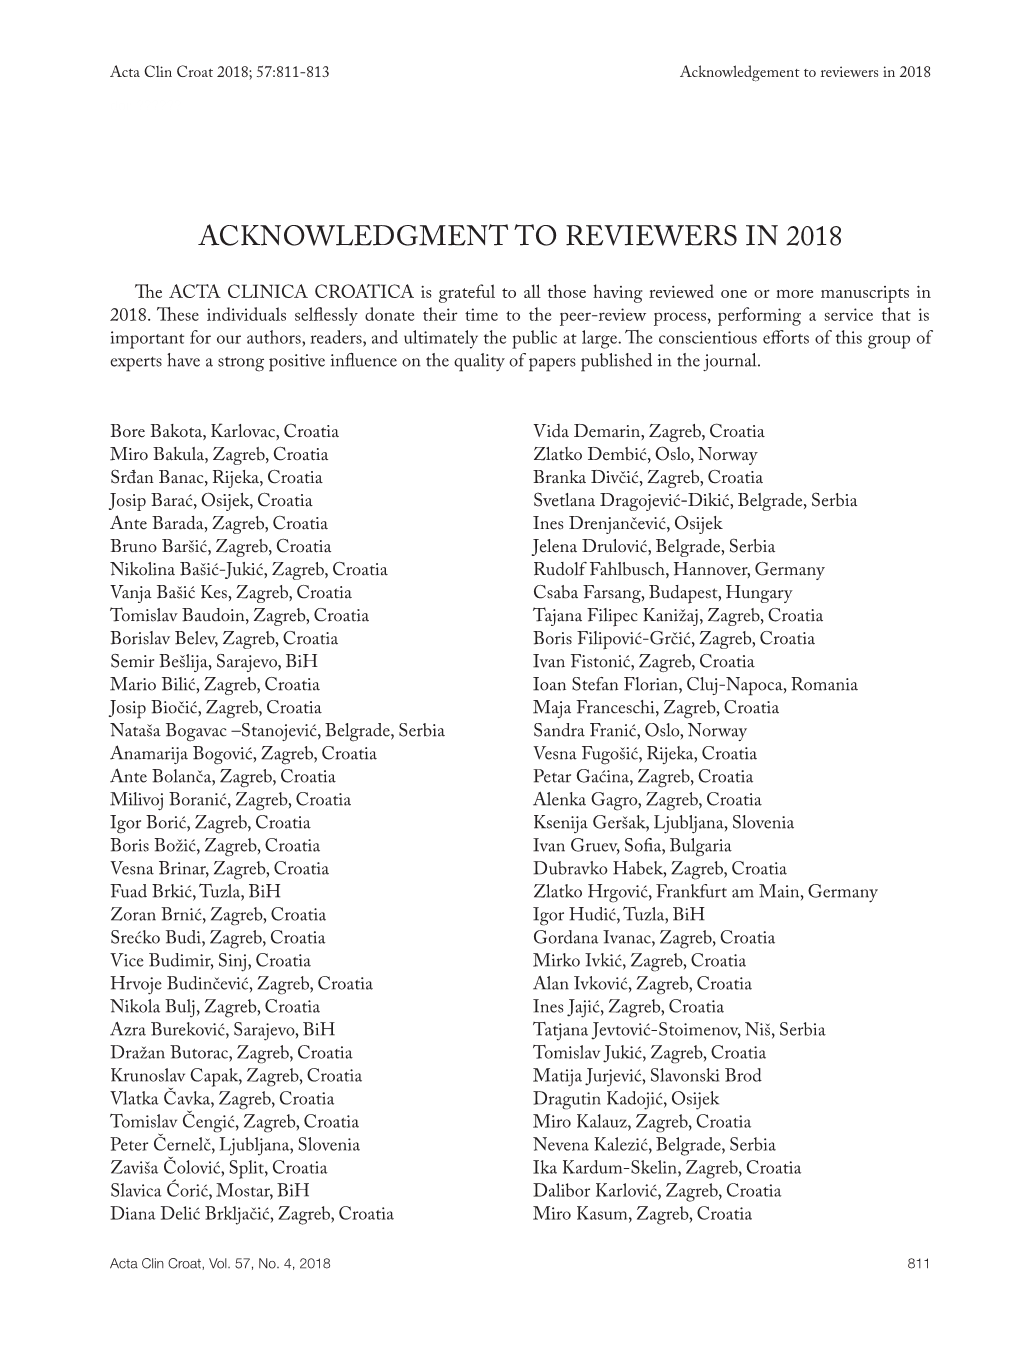 ACKNOWLEDGMENT to REVIEWERS in 2018.Indd